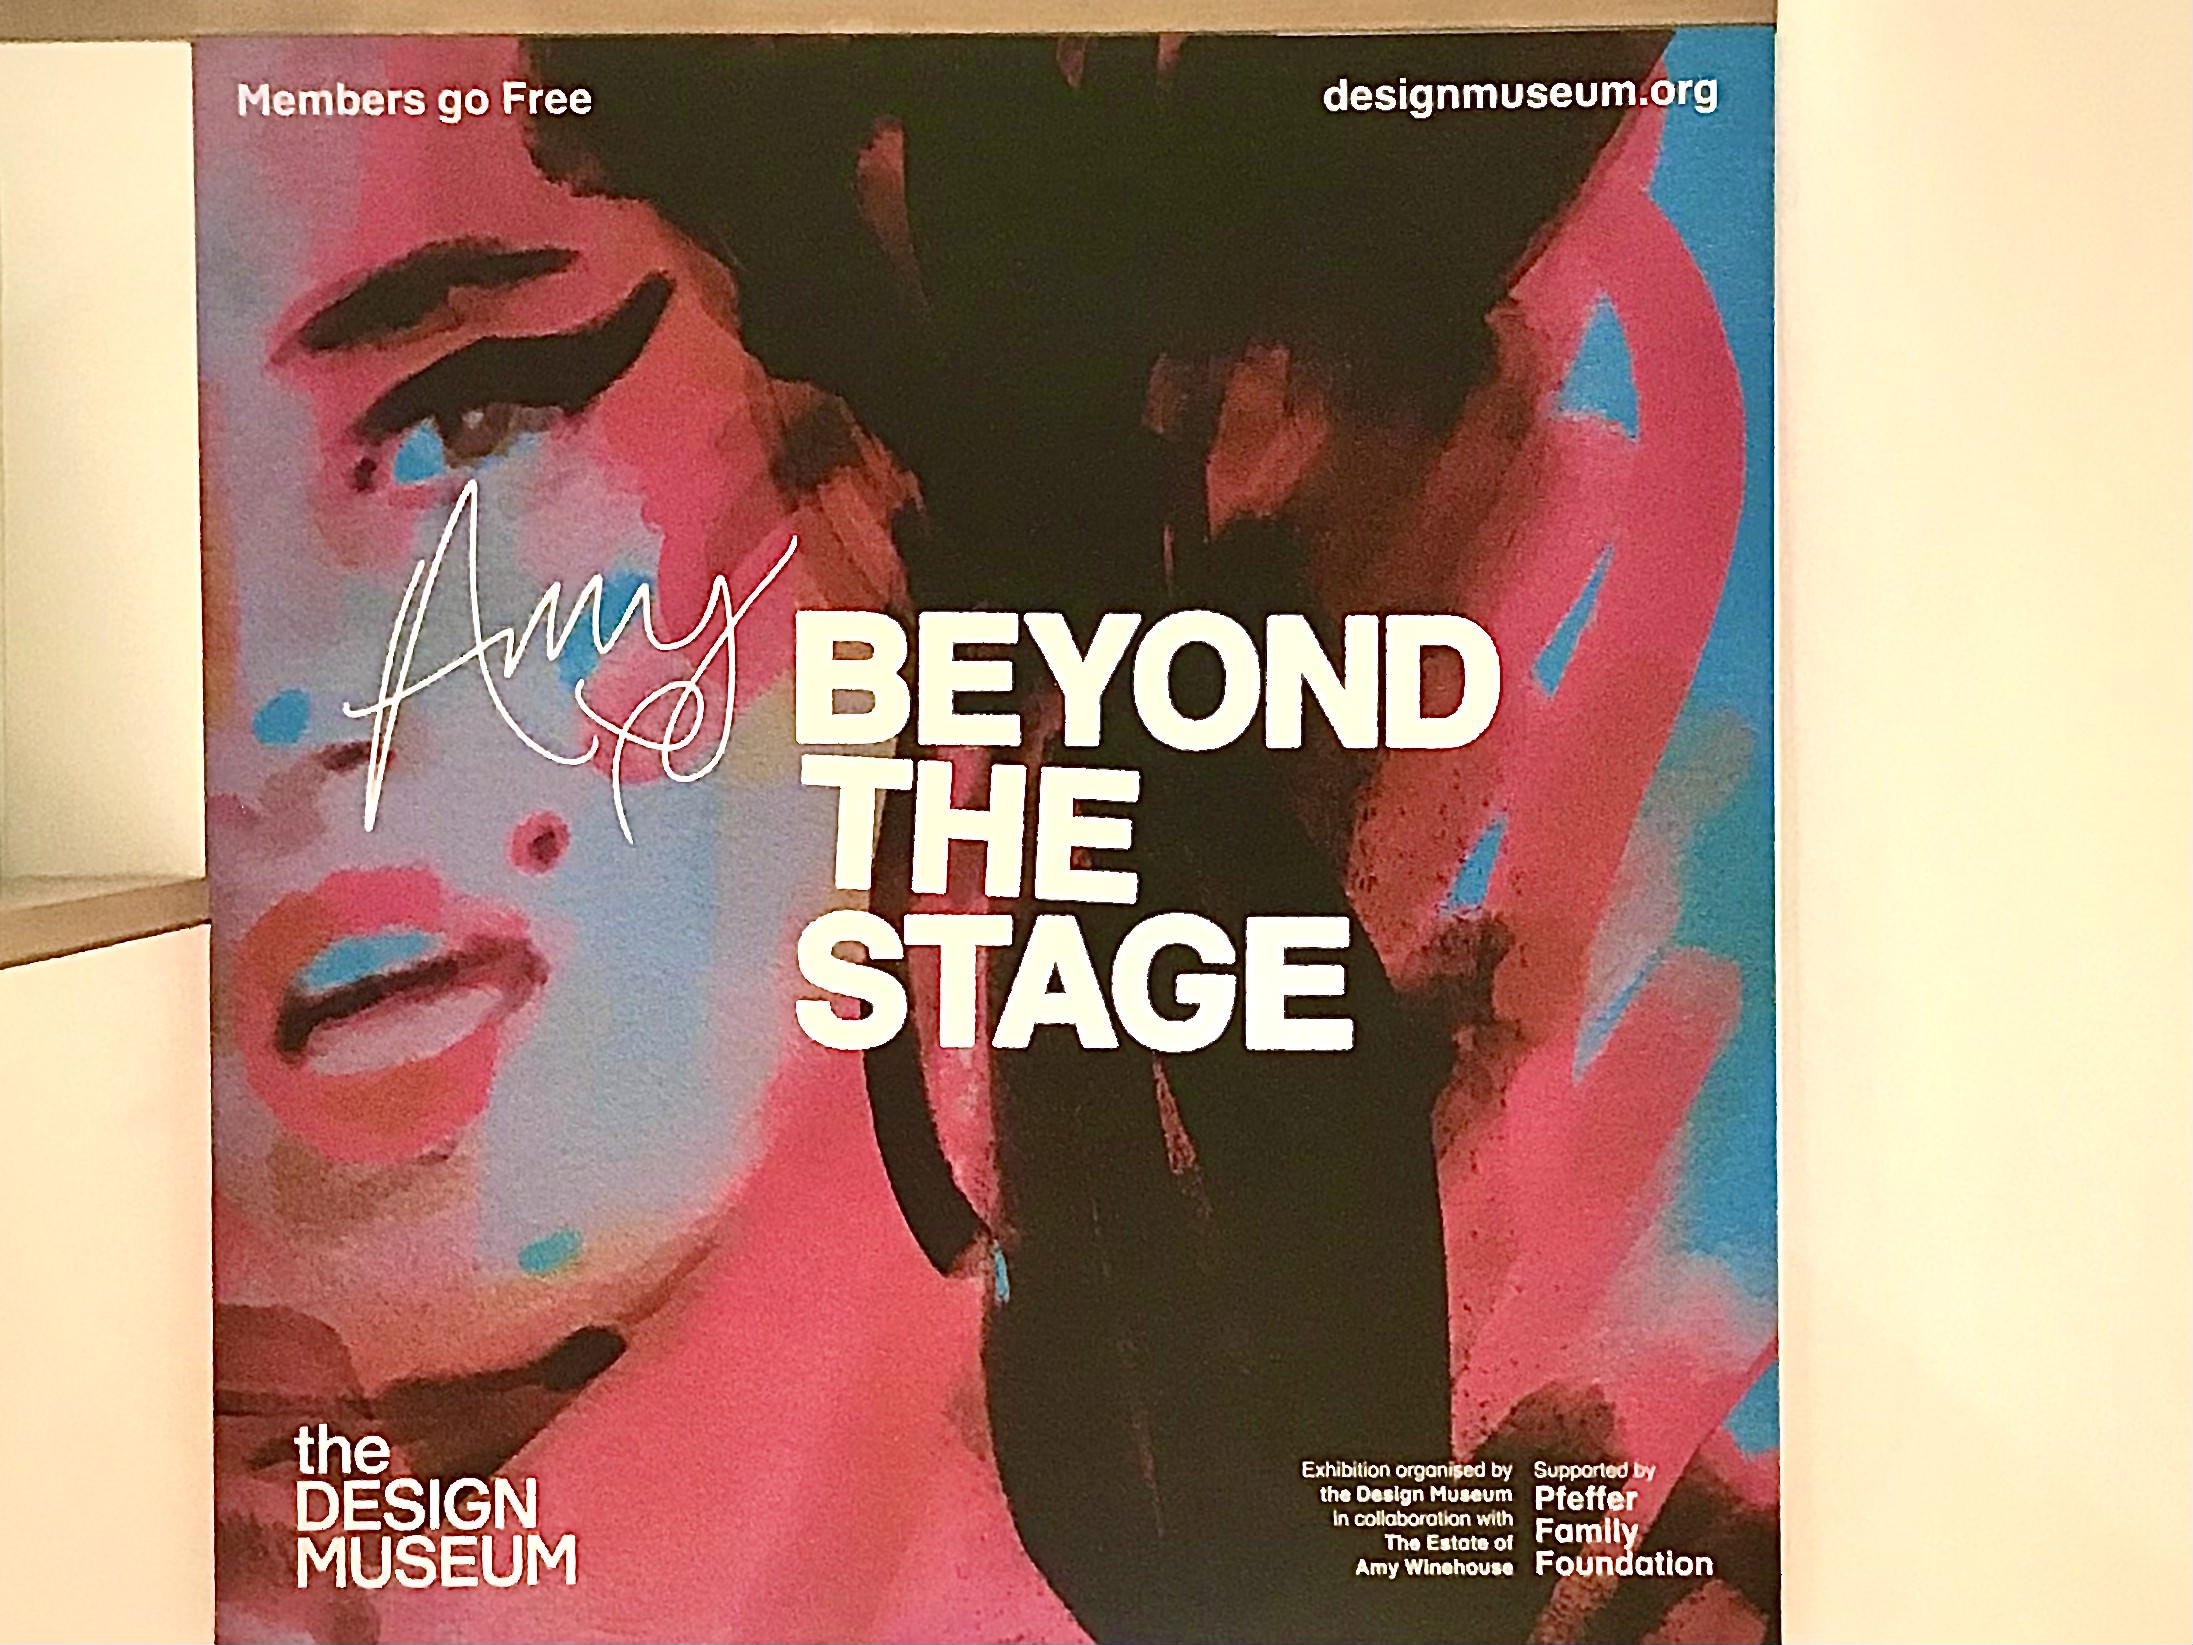 Amy Winehouse at the Design Museum: a Fresh Perspective – Rosa Snow, KGS